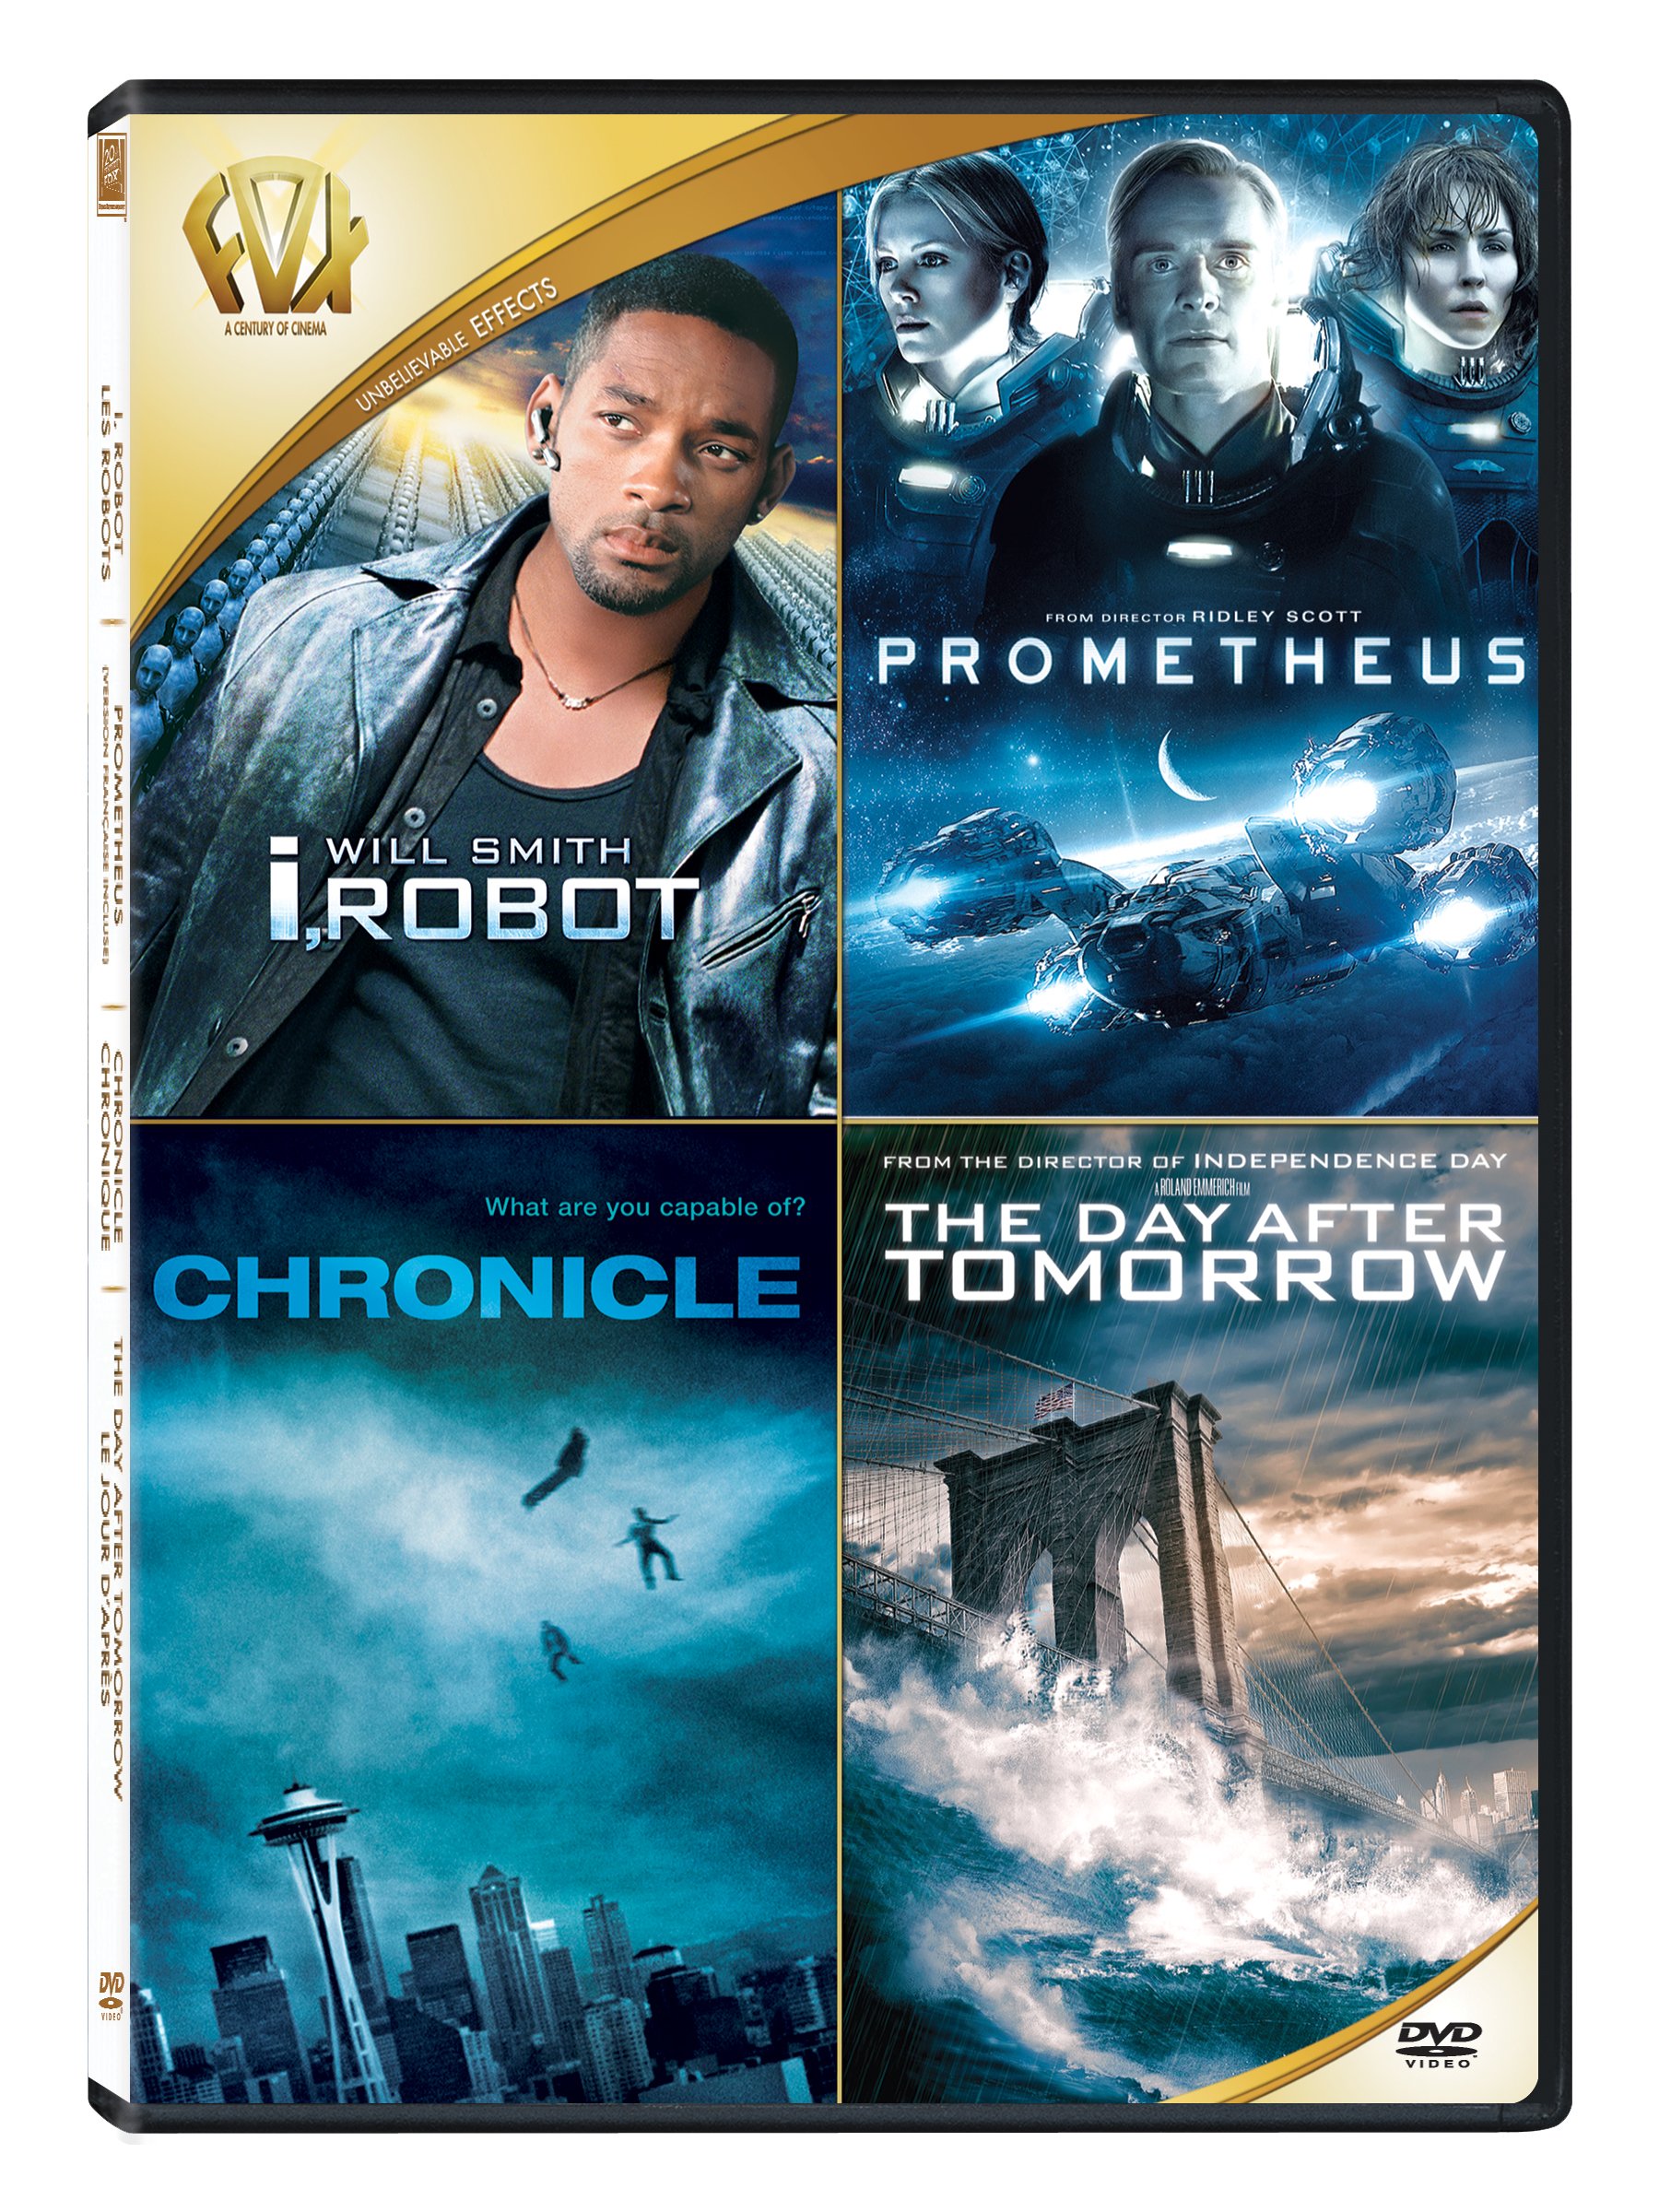 4-sci-fi-movies-collection-i-robot-prometheus-chronicle-the-day-after-tomorrow-4-disc-box-set